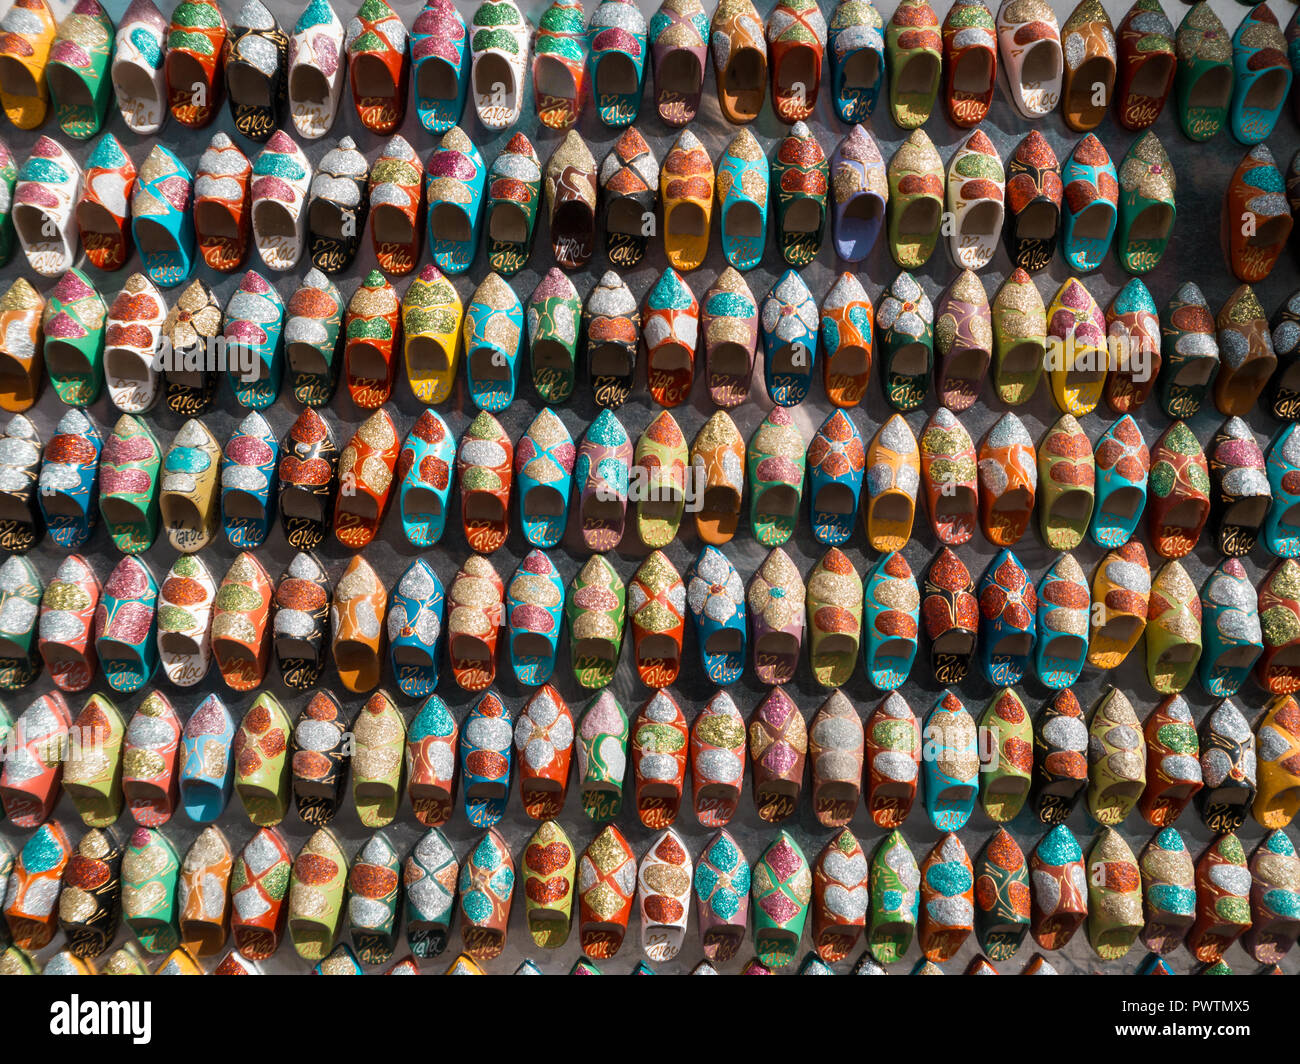 Colorful Miniature Shoes on a moroccan market Stock Photo